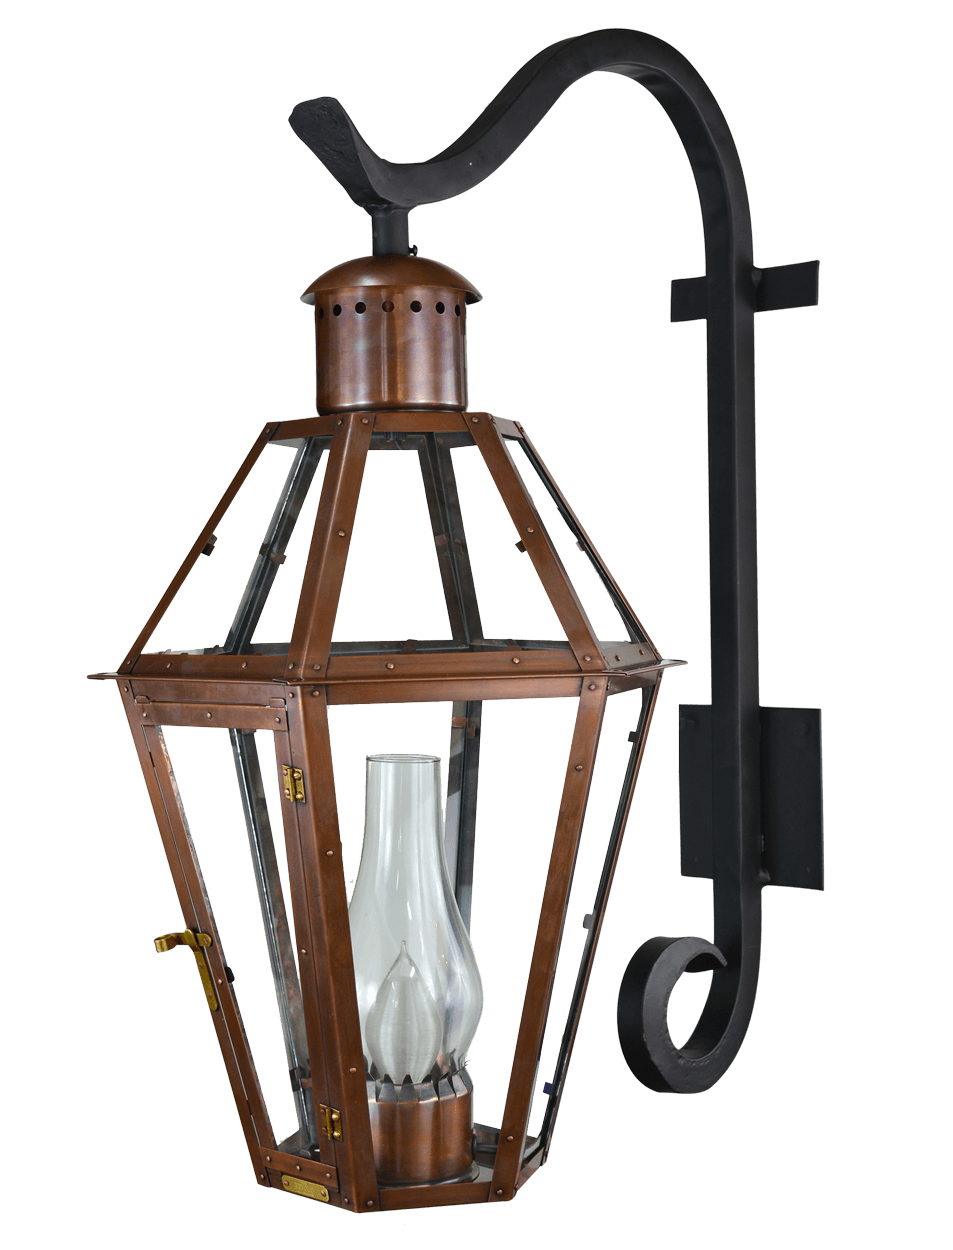 Six-Sided French Quarter® | Bevolo Gas & Electric Lighting